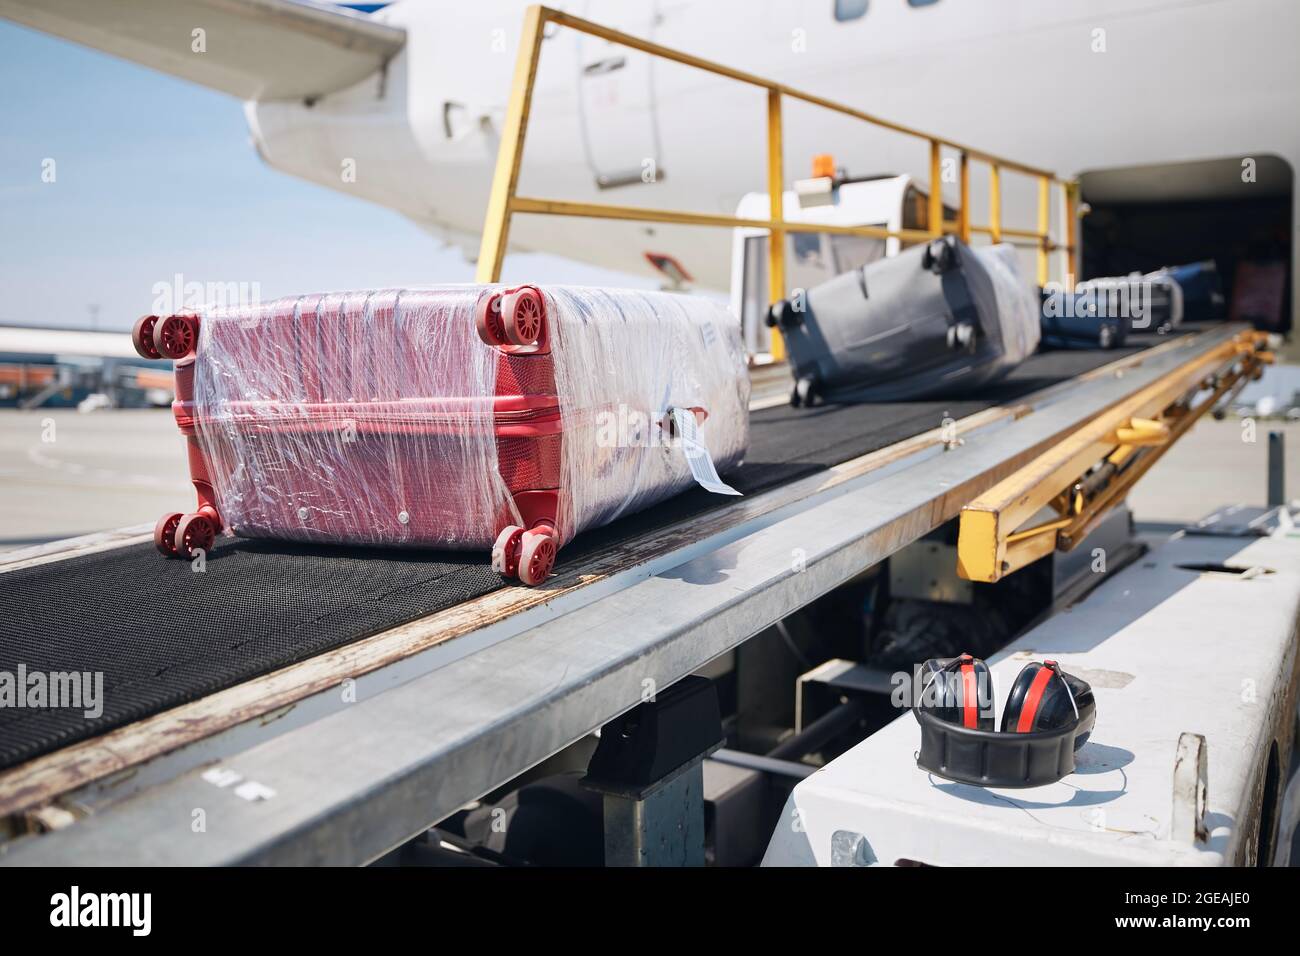 Loading of luggage to airplane. Suitcases on conveyor belt to plane. Stock Photo